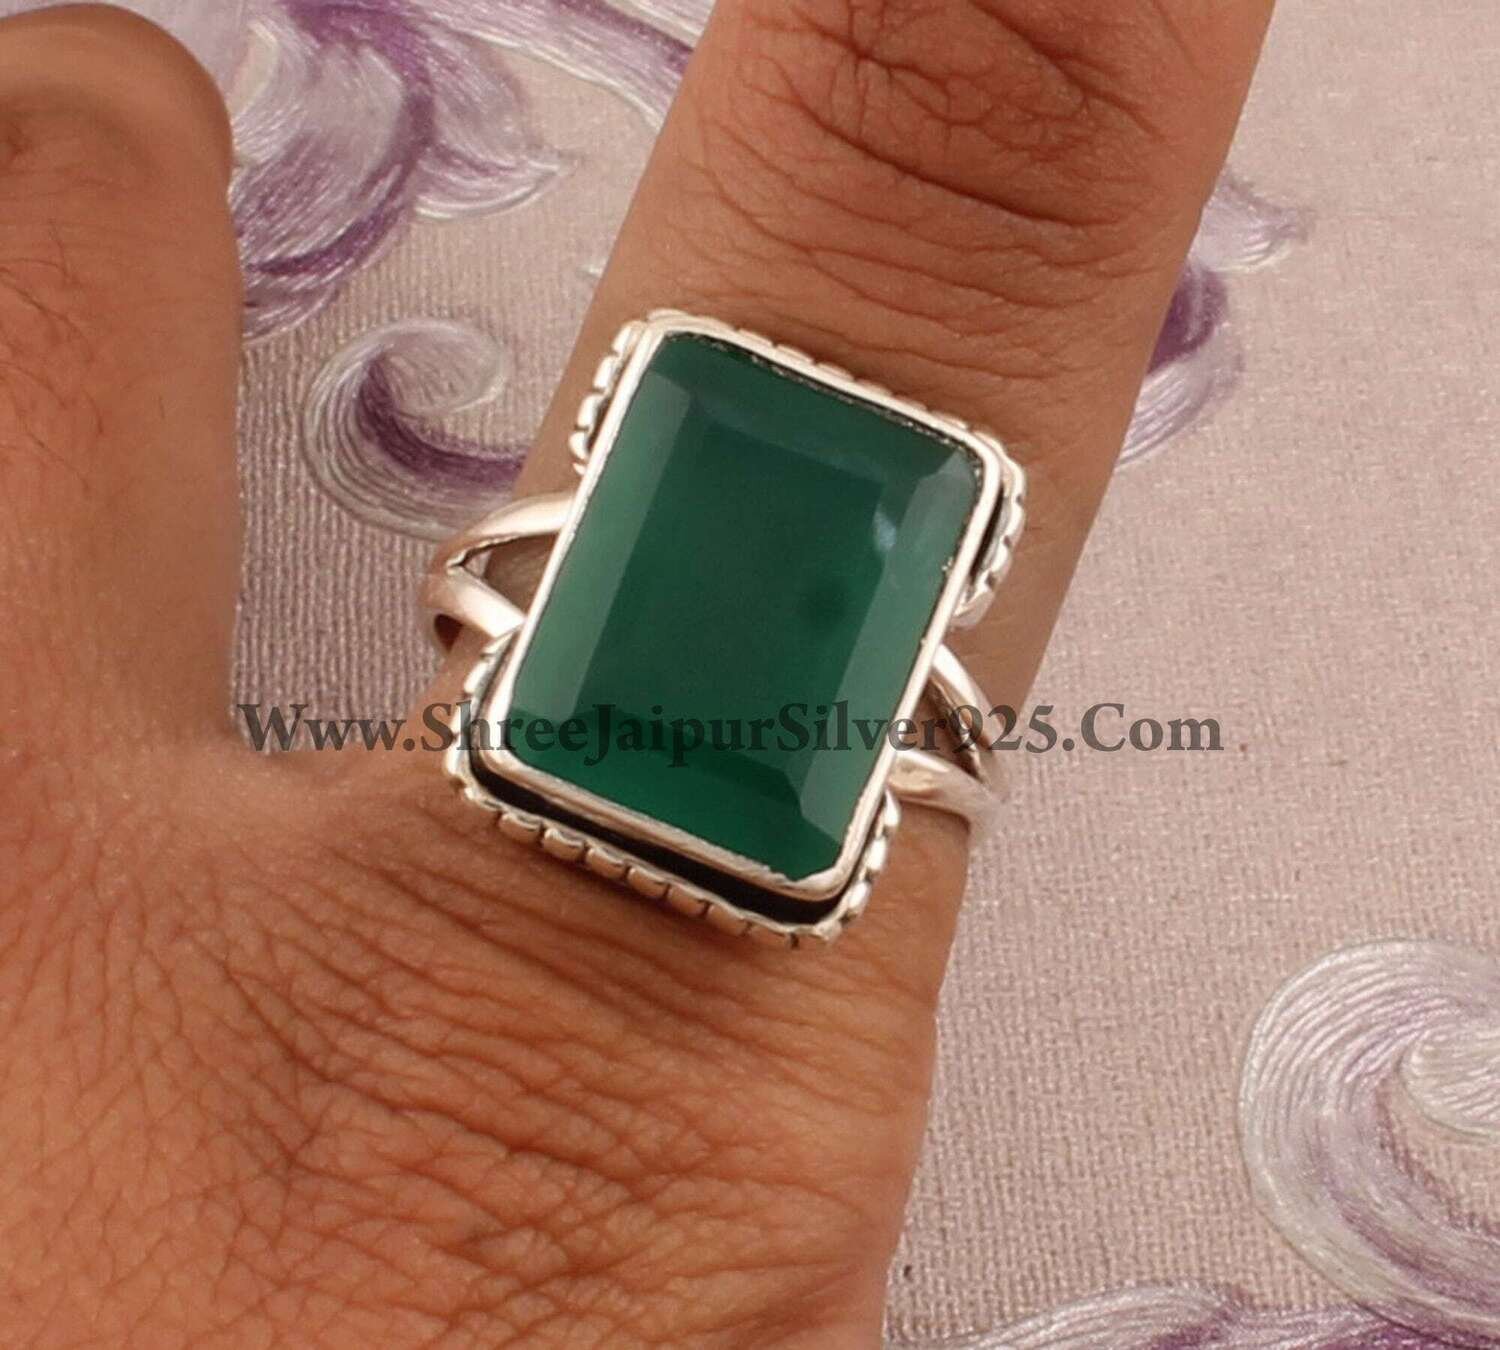 925 Sterling Silver Green Onyx Rectangle Ring For Women, Handmade Onyx Gemstone Silver Ring For Her, Faceted Onyx Ring For Bridesmaid Gift